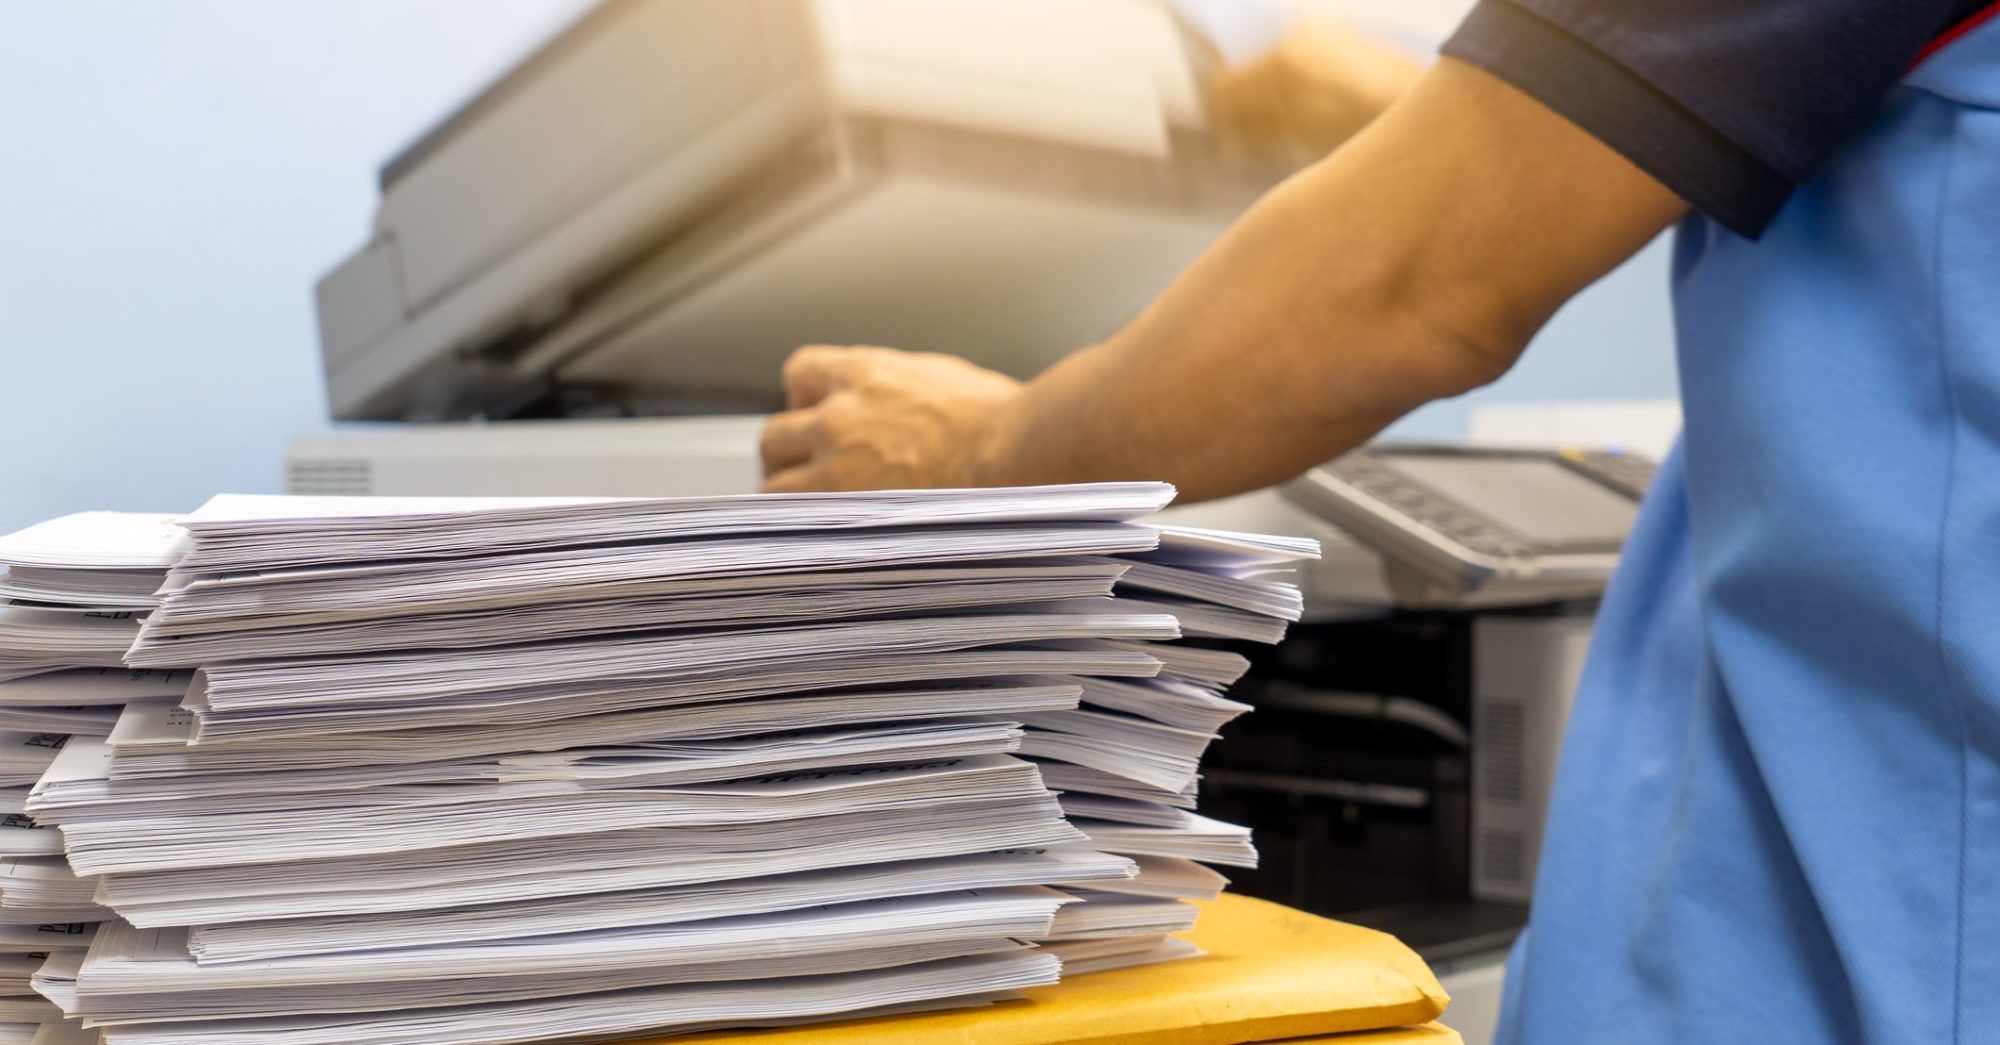 The papers stacked waiting to be scanned. Desktop scanner. In-house scanner. Document scanning.